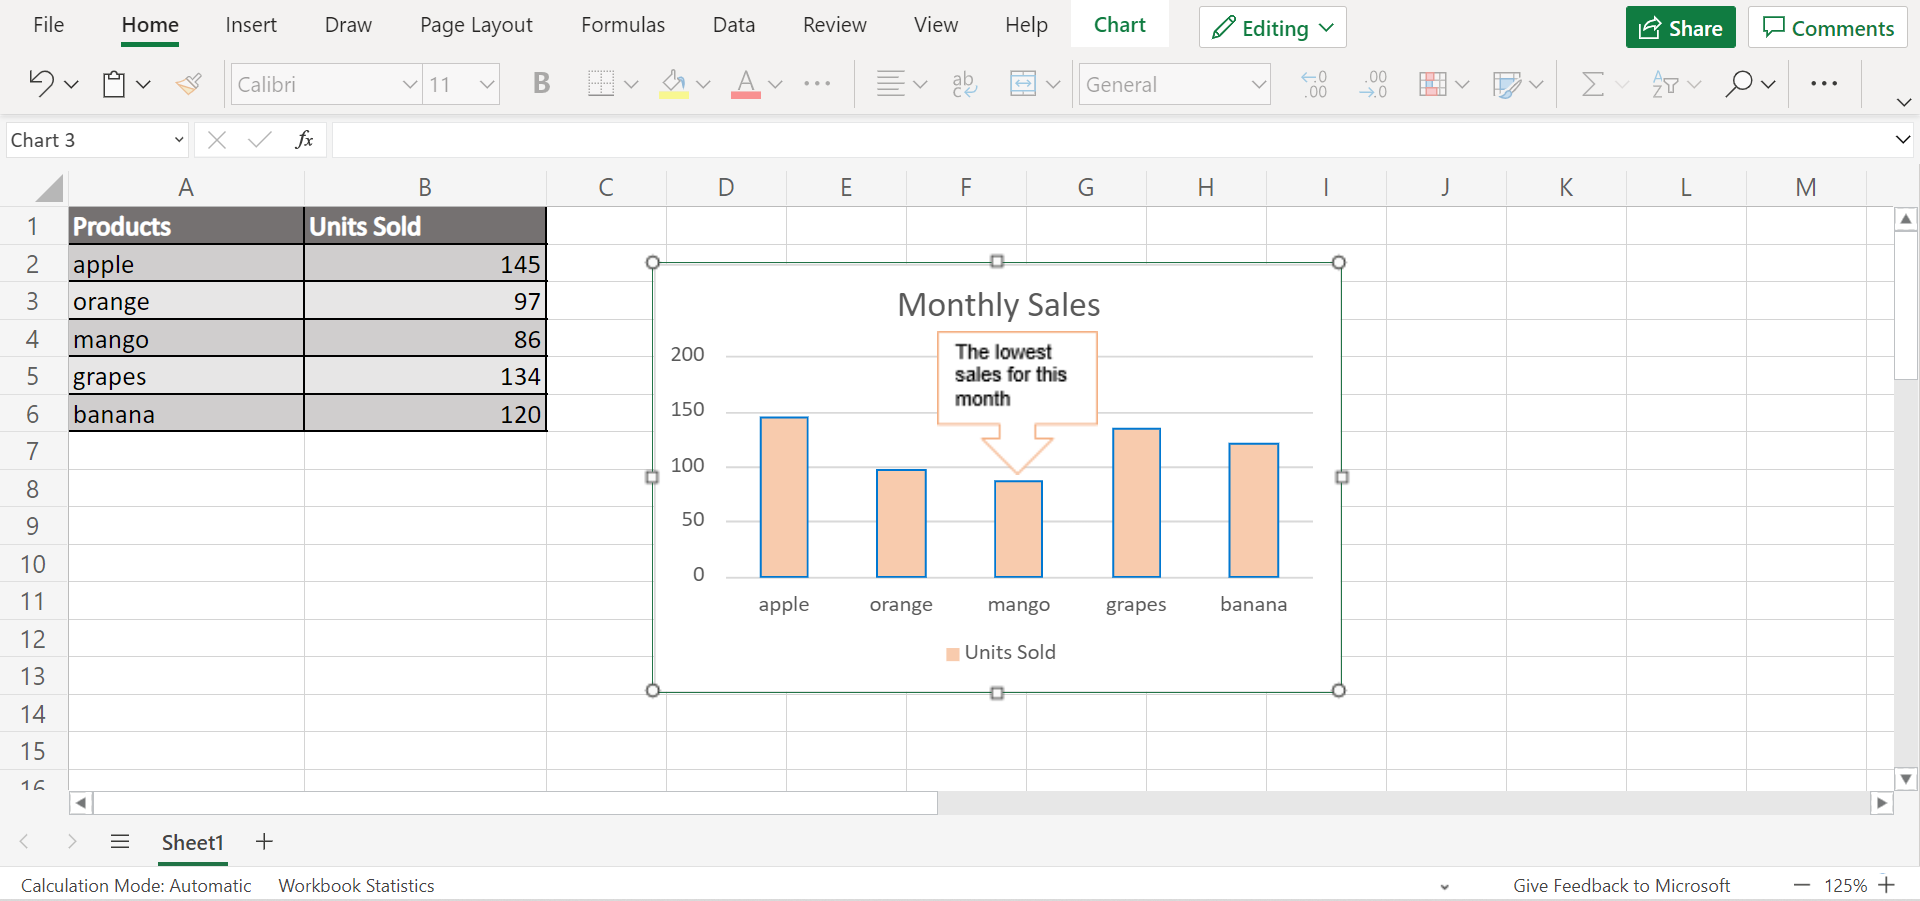 Add Comment to Data Point on Chart in Excel